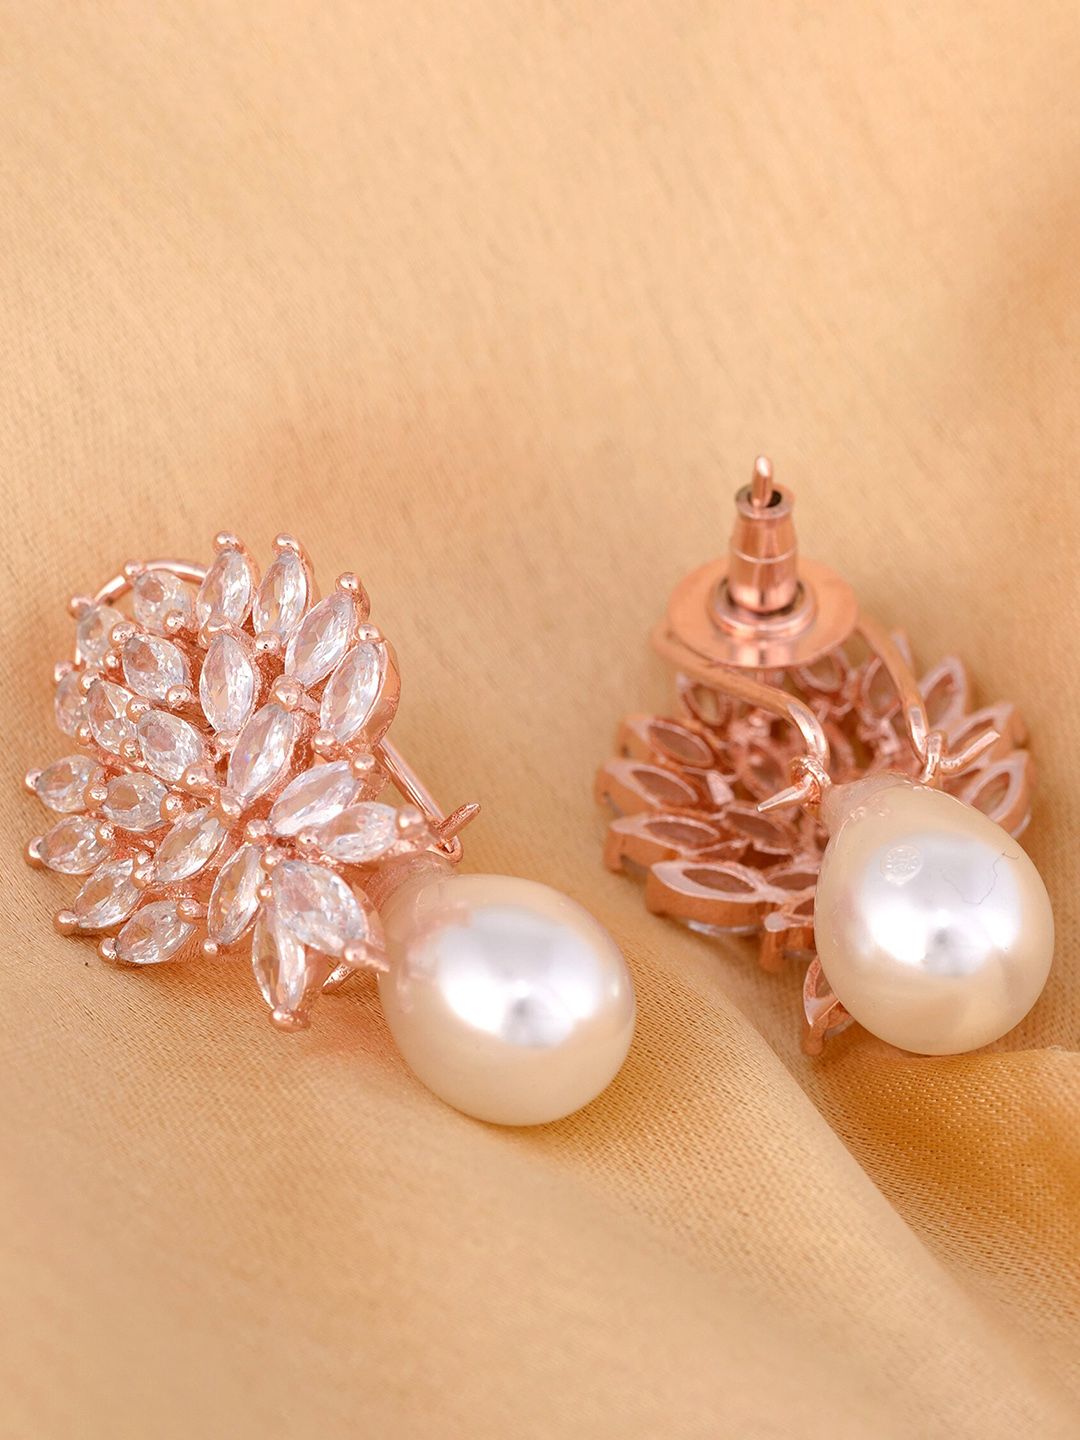 Saraf RS Jewellery White & Rose Gold-Plated Contemporary Drop Earrings Price in India